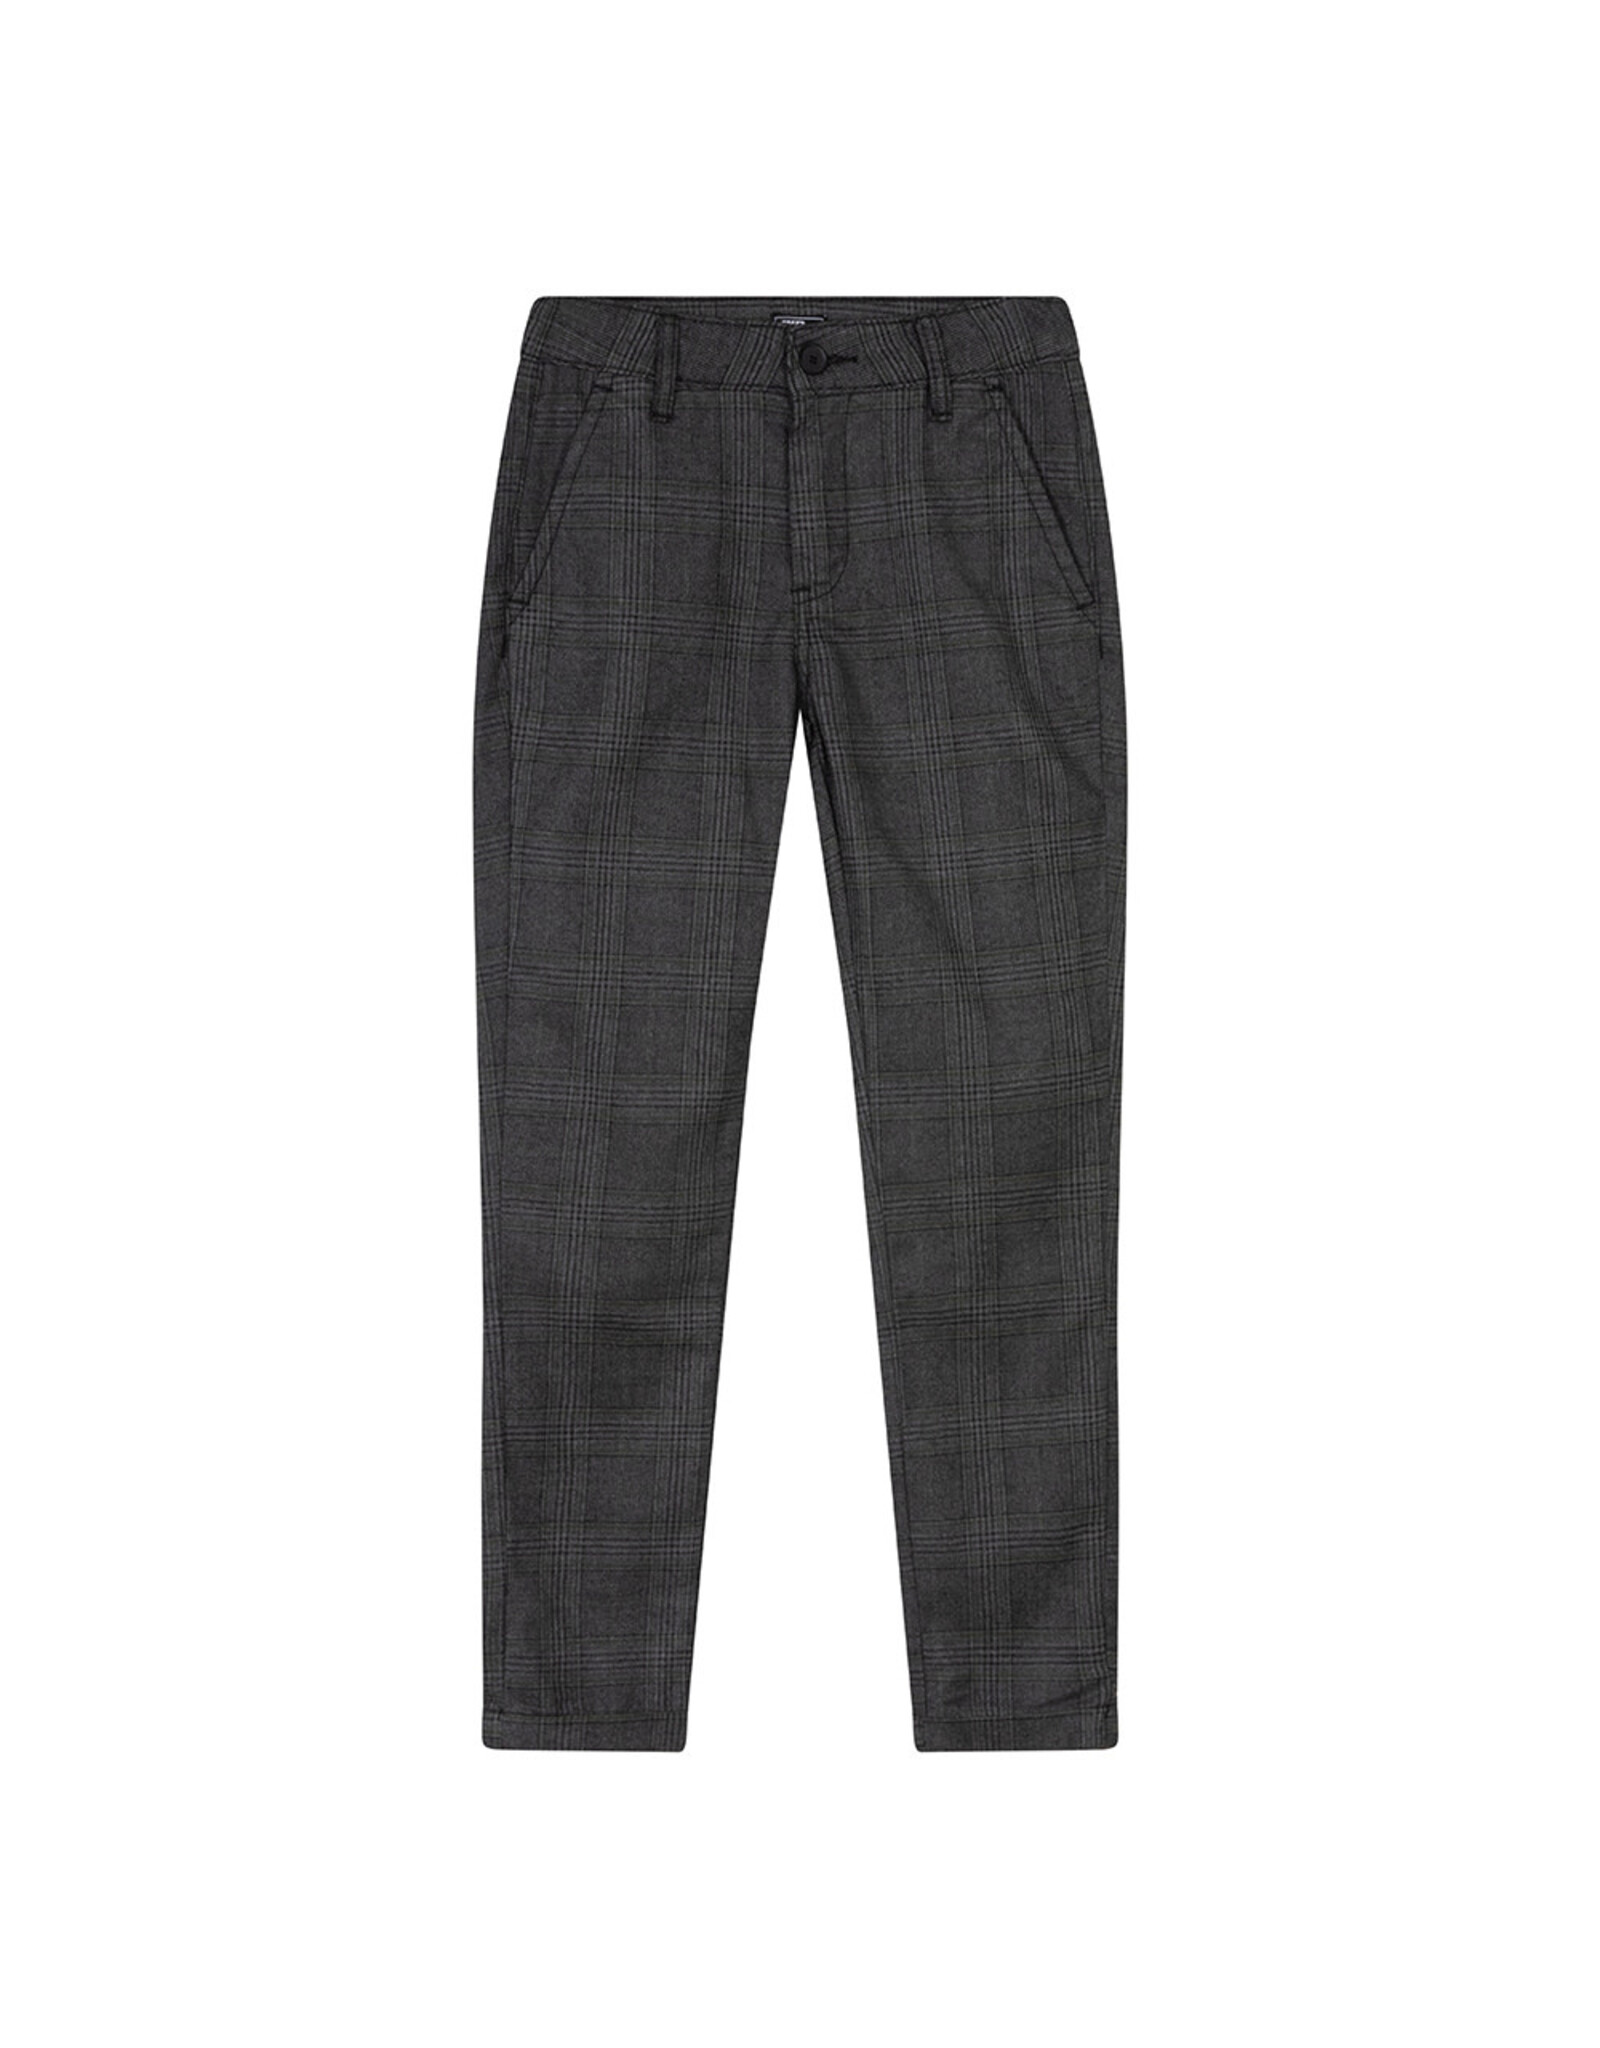 Indian Blue Jeans Chino Pant check Black